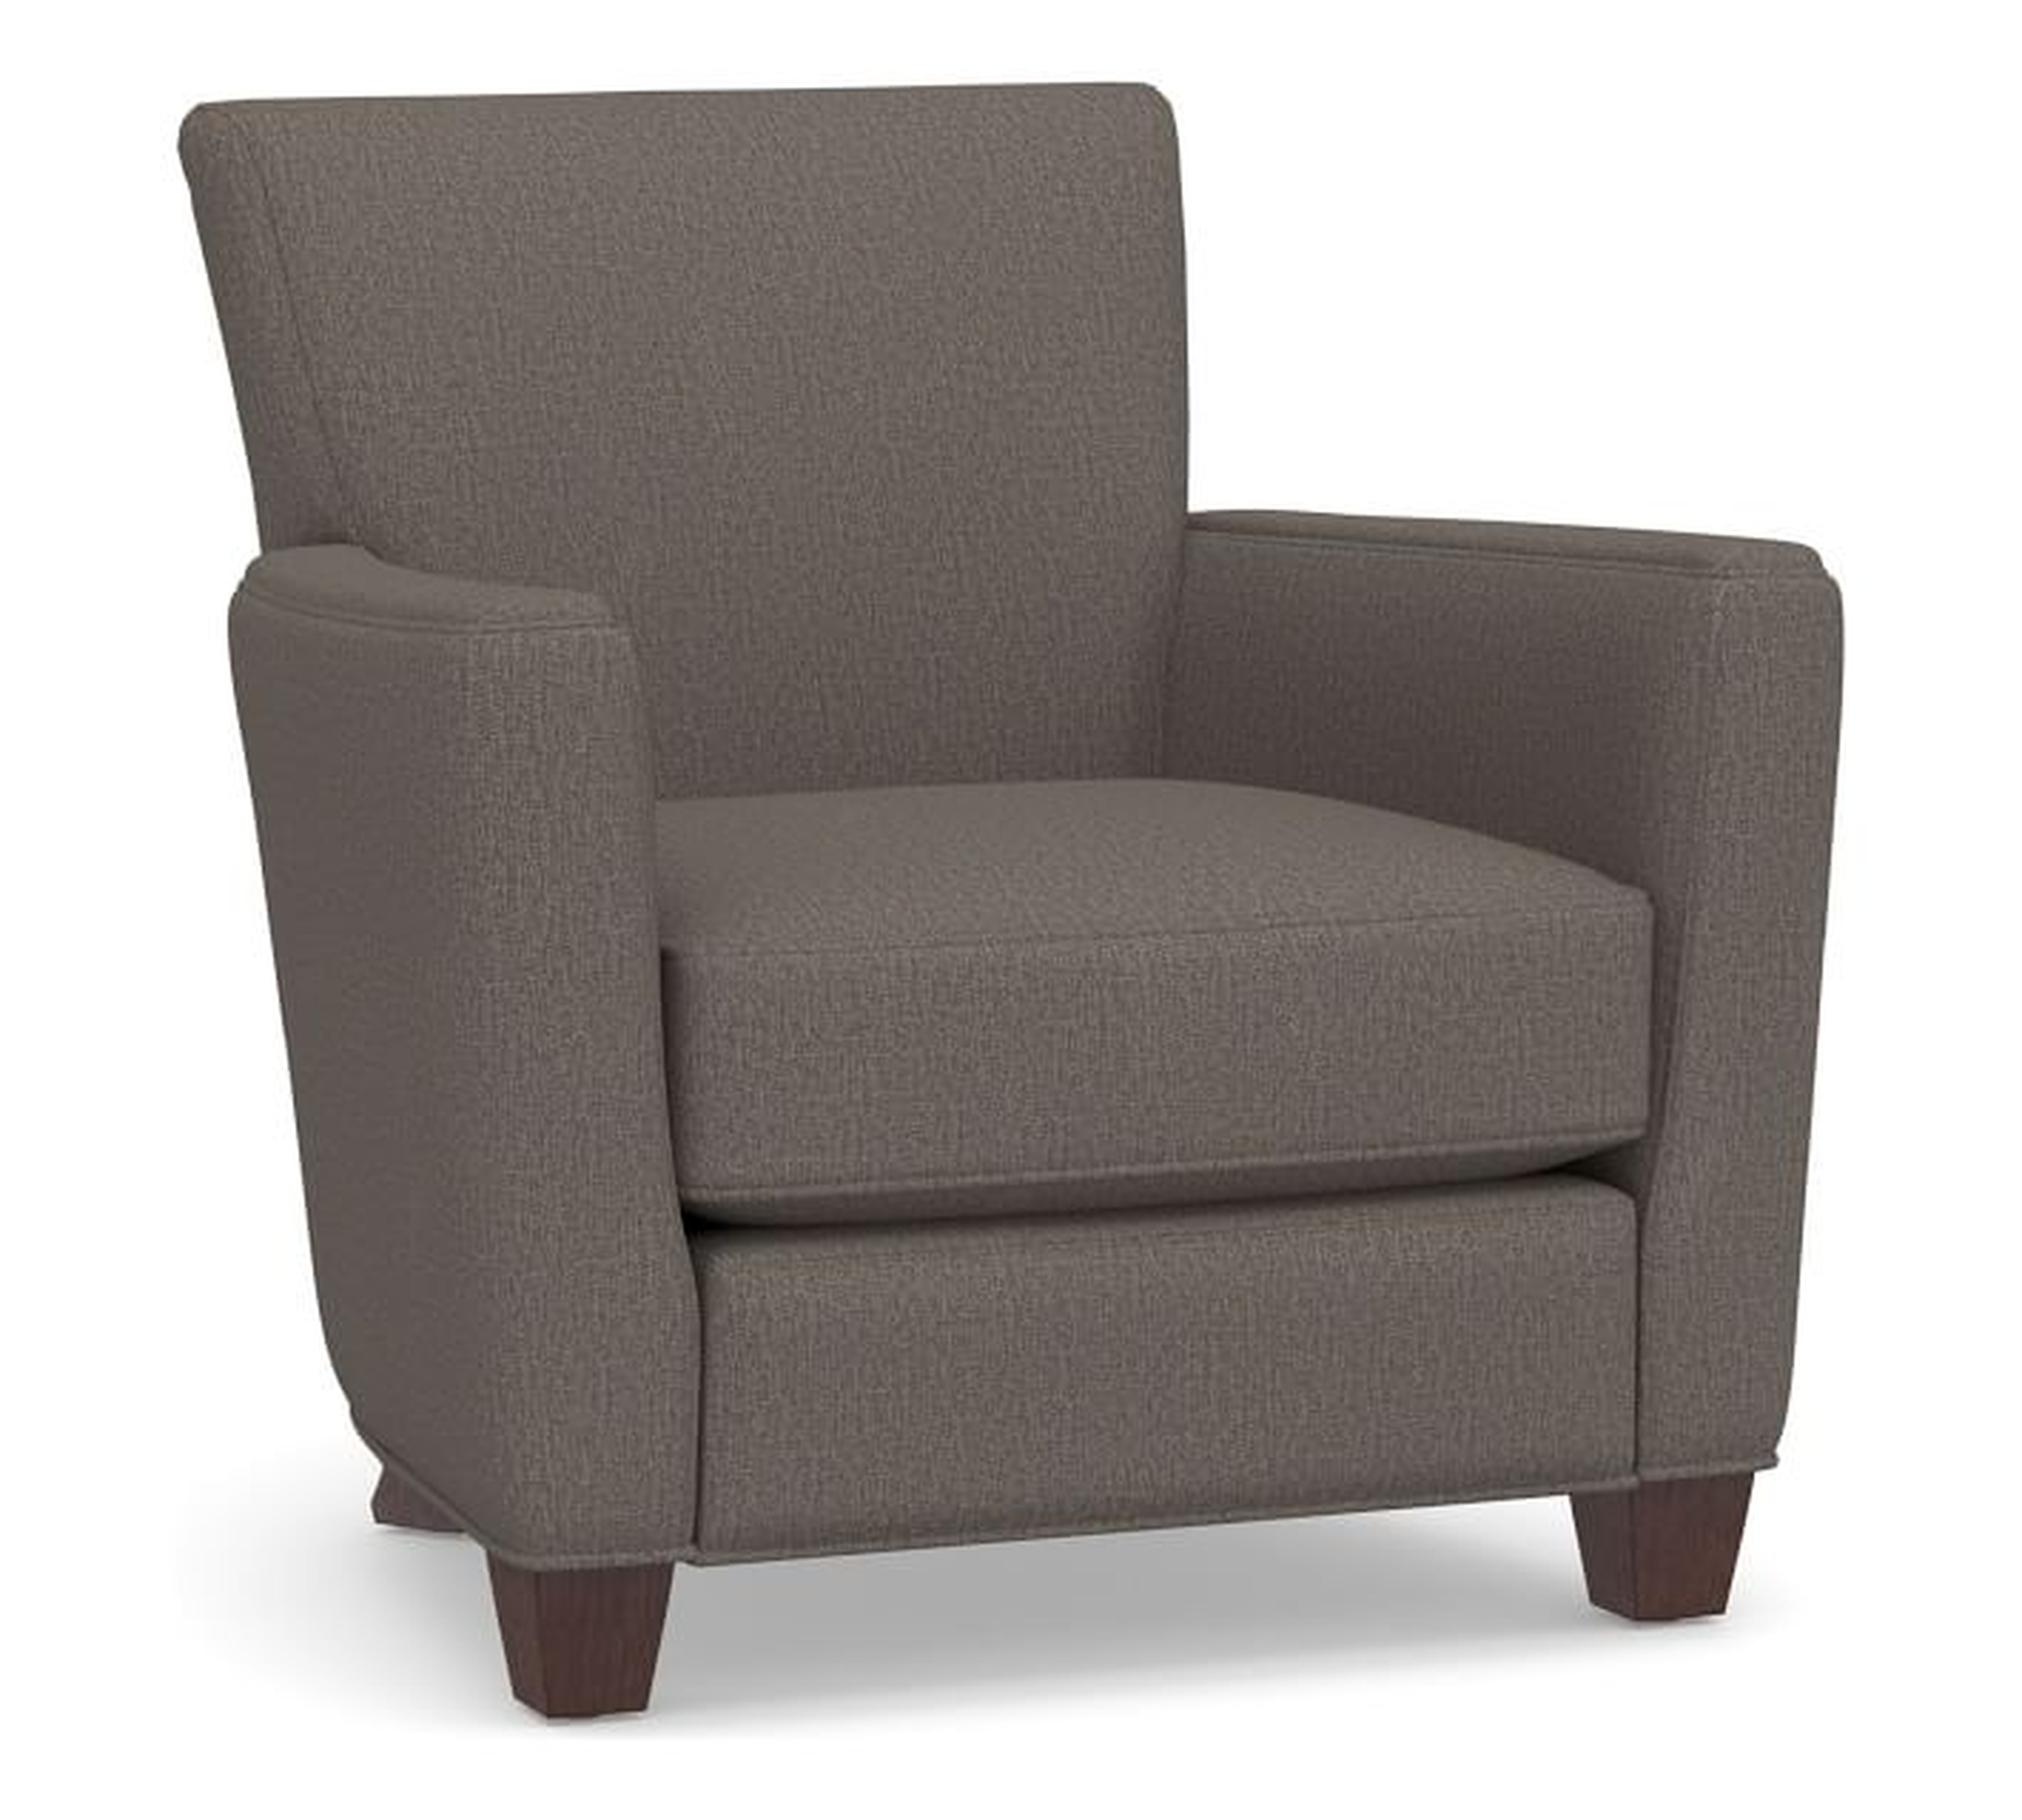 Irving Square Arm Upholstered Recliner without Nailheads, Polyester Wrapped Cushions, Performance Heathered Tweed Graphite - Pottery Barn